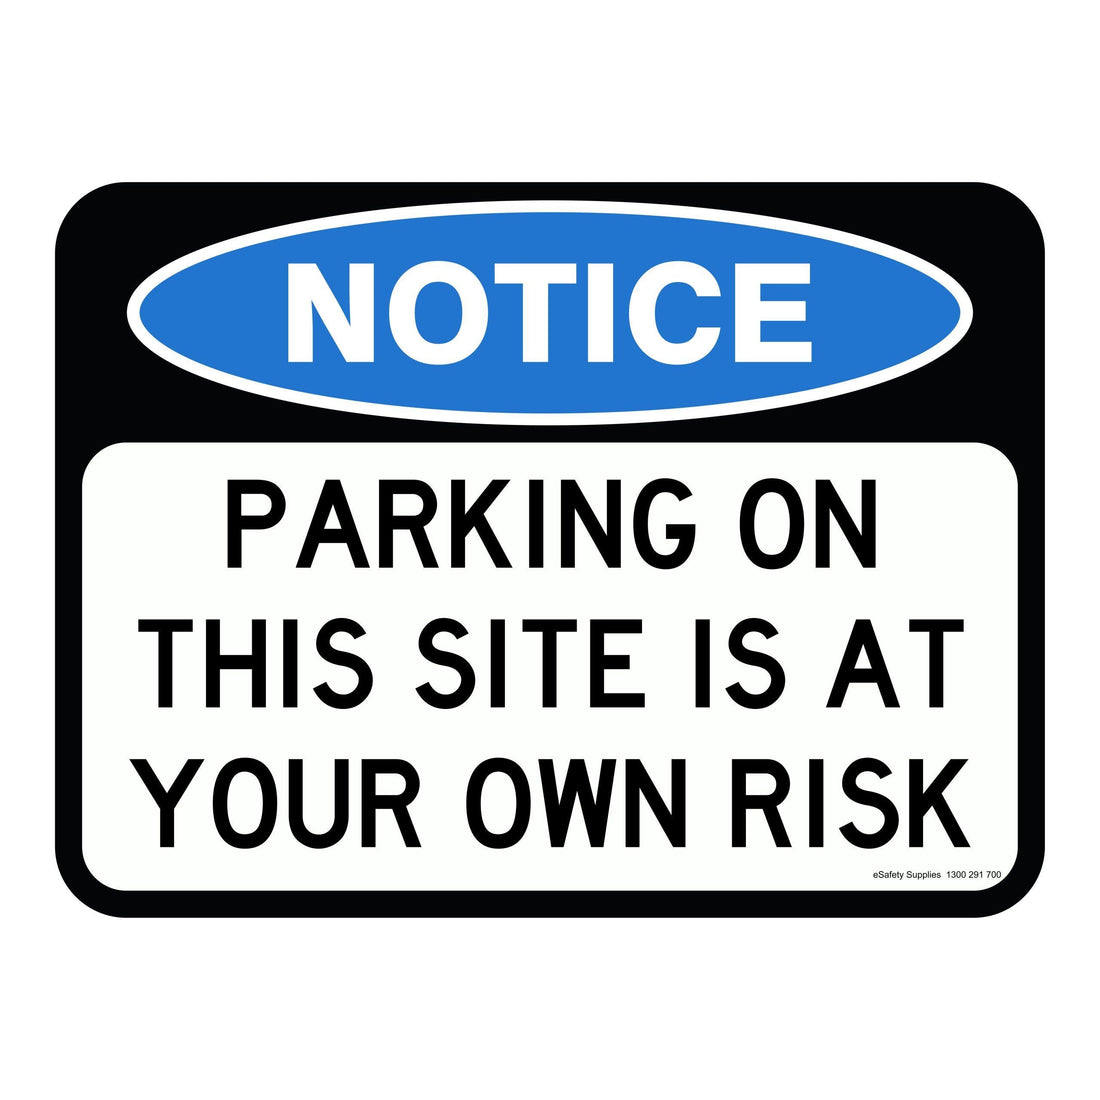 NOTICE - PARKING ON THIS SITE IS AT YOUR OWN RISK